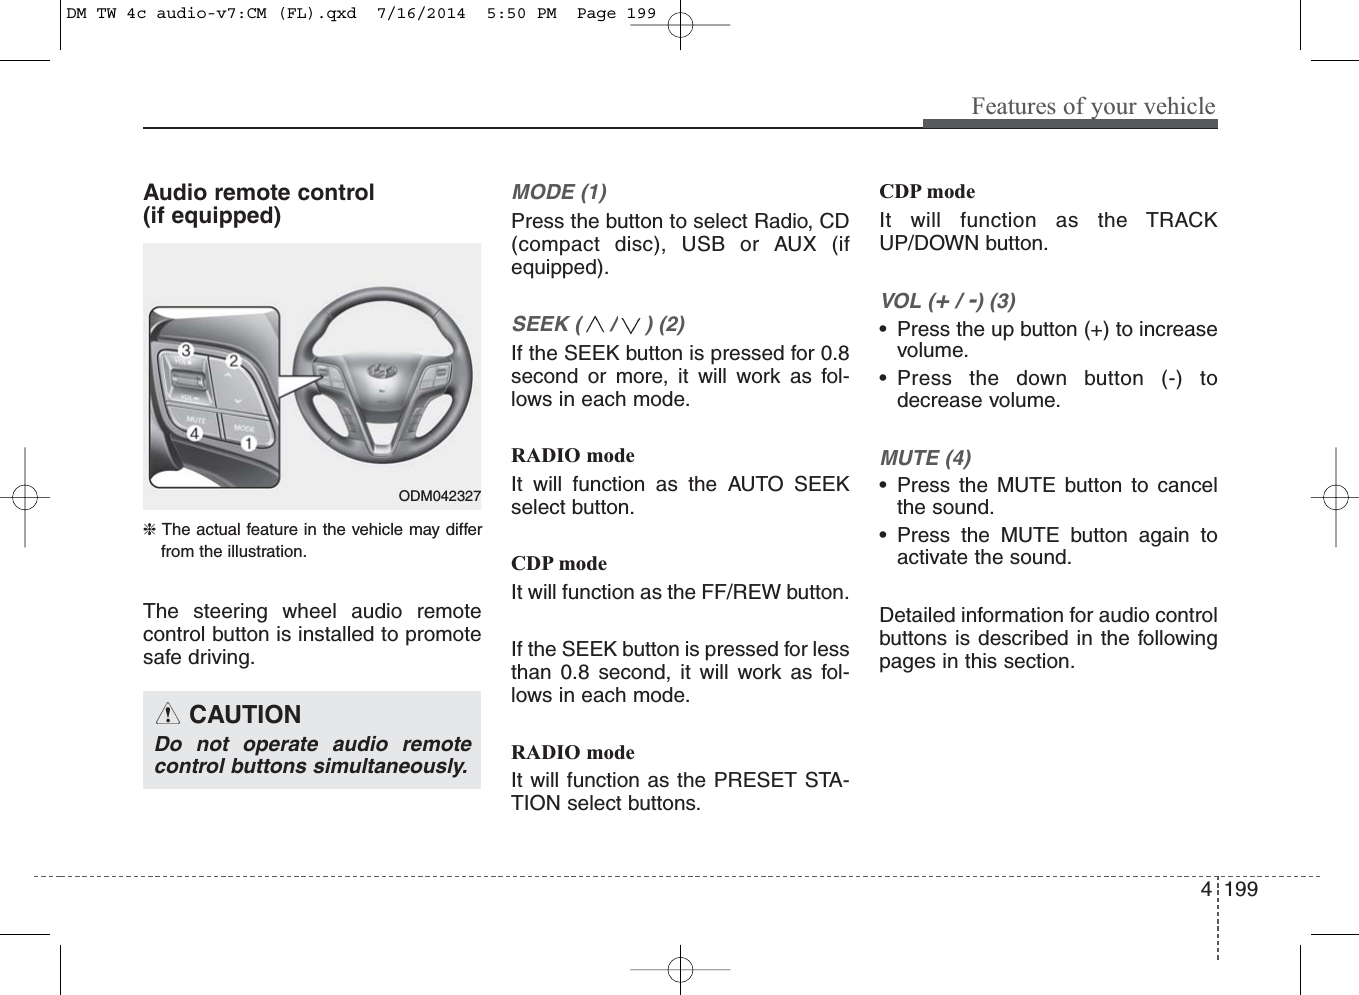 4 199Features of your vehicleAudio remote control (if equipped) ❈ The actual feature in the vehicle may differfrom the illustration.The steering wheel audio remotecontrol button is installed to promotesafe driving. MODE (1)Press the button to select Radio, CD(compact disc), USB or AUX (ifequipped).SEEK ( / ) (2)If the SEEK button is pressed for 0.8second or more, it will work as fol-lows in each mode.RADIO modeIt will function as the AUTO SEEKselect button.CDP modeIt will function as the FF/REW button.If the SEEK button is pressed for lessthan 0.8 second, it will work as fol-lows in each mode.RADIO modeIt will function as the PRESET STA-TION select buttons.CDP modeIt will function as the TRACKUP/DOWN button.VOL (+/ -) (3)• Press the up button (+) to increasevolume.• Press the down button (-) todecrease volume.MUTE (4)• Press the MUTE button to cancelthe sound.• Press the MUTE button again toactivate the sound.Detailed information for audio controlbuttons is described in the followingpages in this section.CAUTIONDo not operate audio remotecontrol buttons simultaneously.ODM042327DM TW 4c audio-v7:CM (FL).qxd  7/16/2014  5:50 PM  Page 199